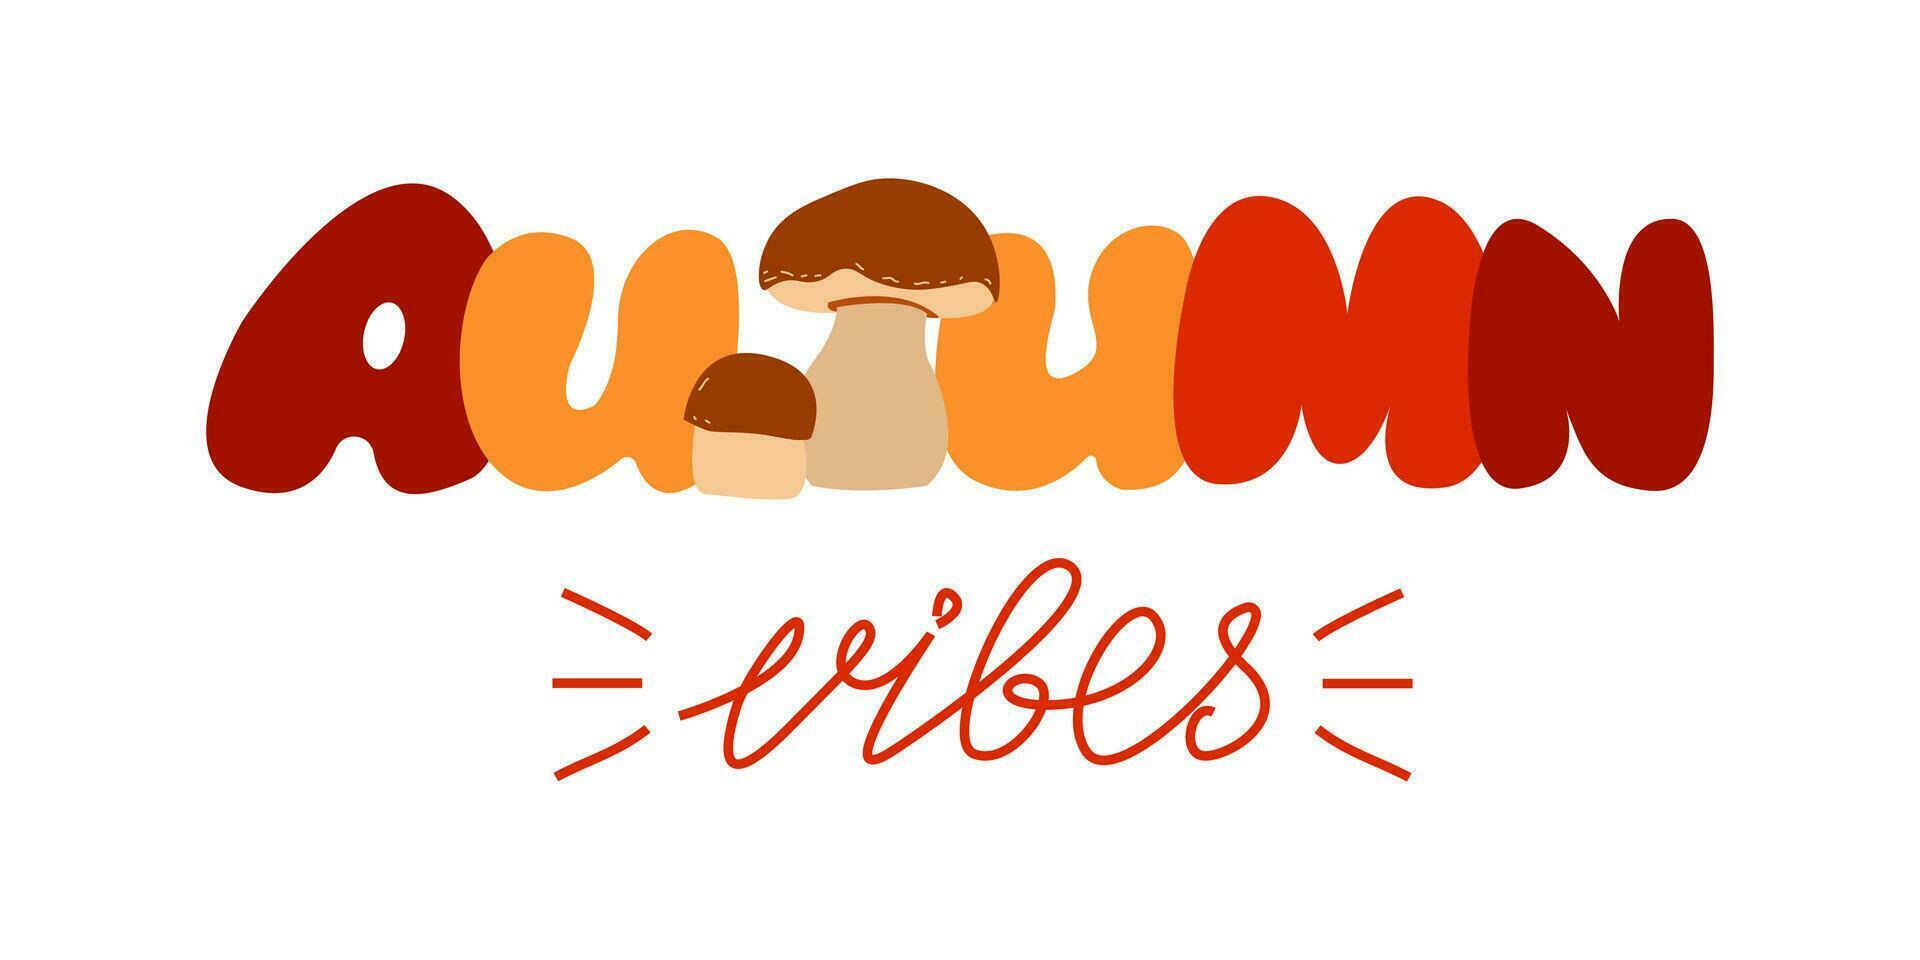 Autumn vibes lettering with mushrooms vector